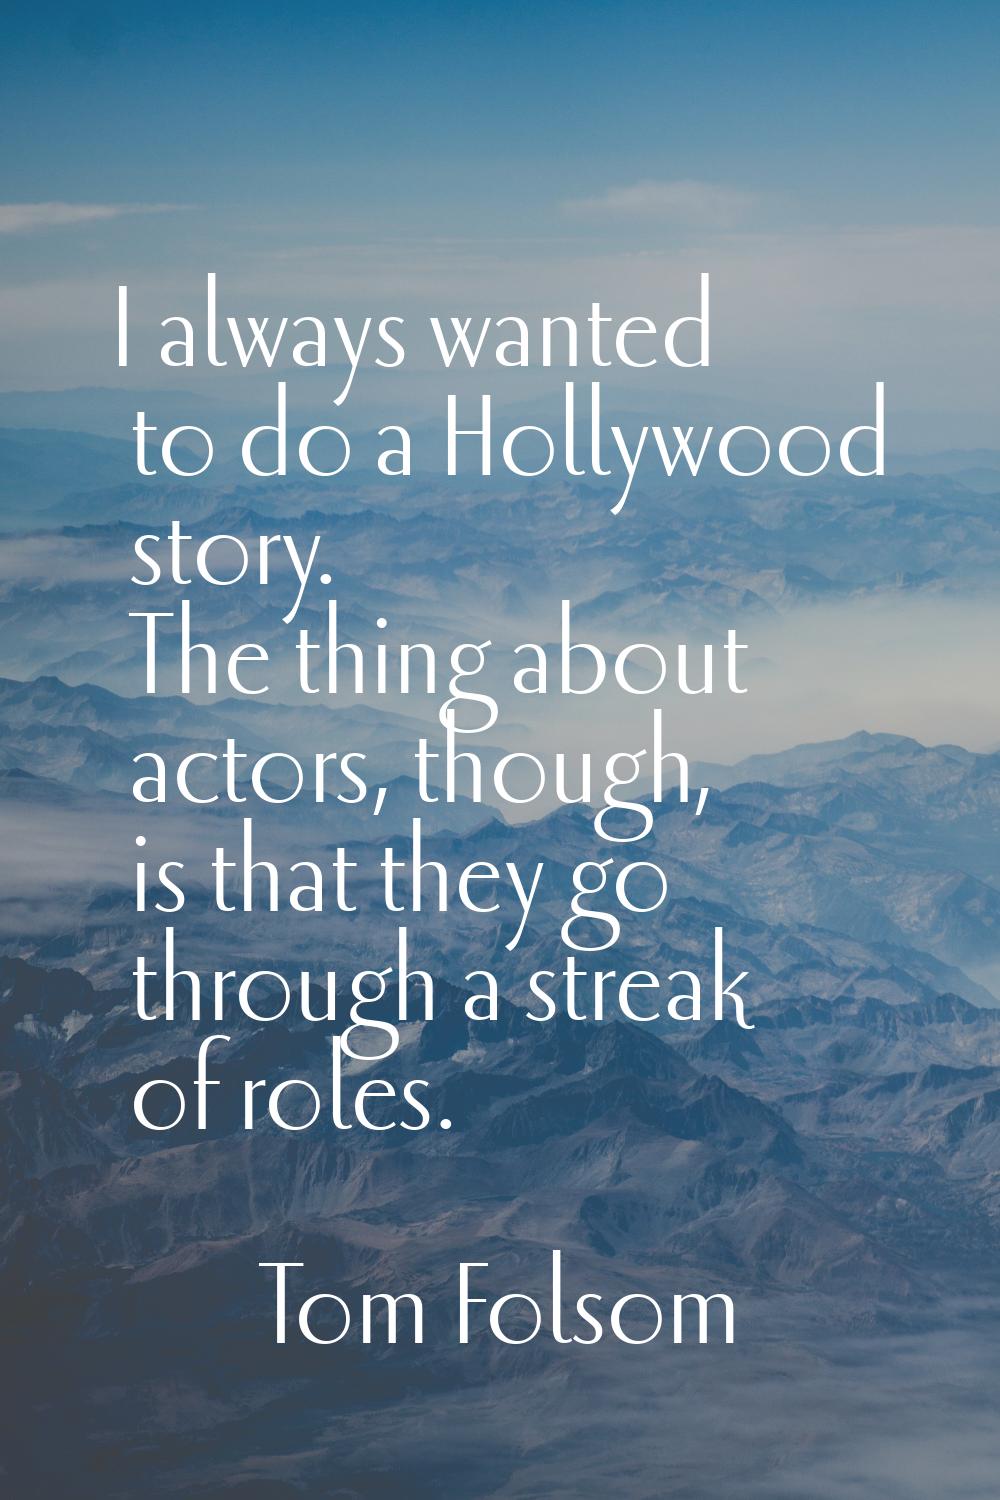 I always wanted to do a Hollywood story. The thing about actors, though, is that they go through a 